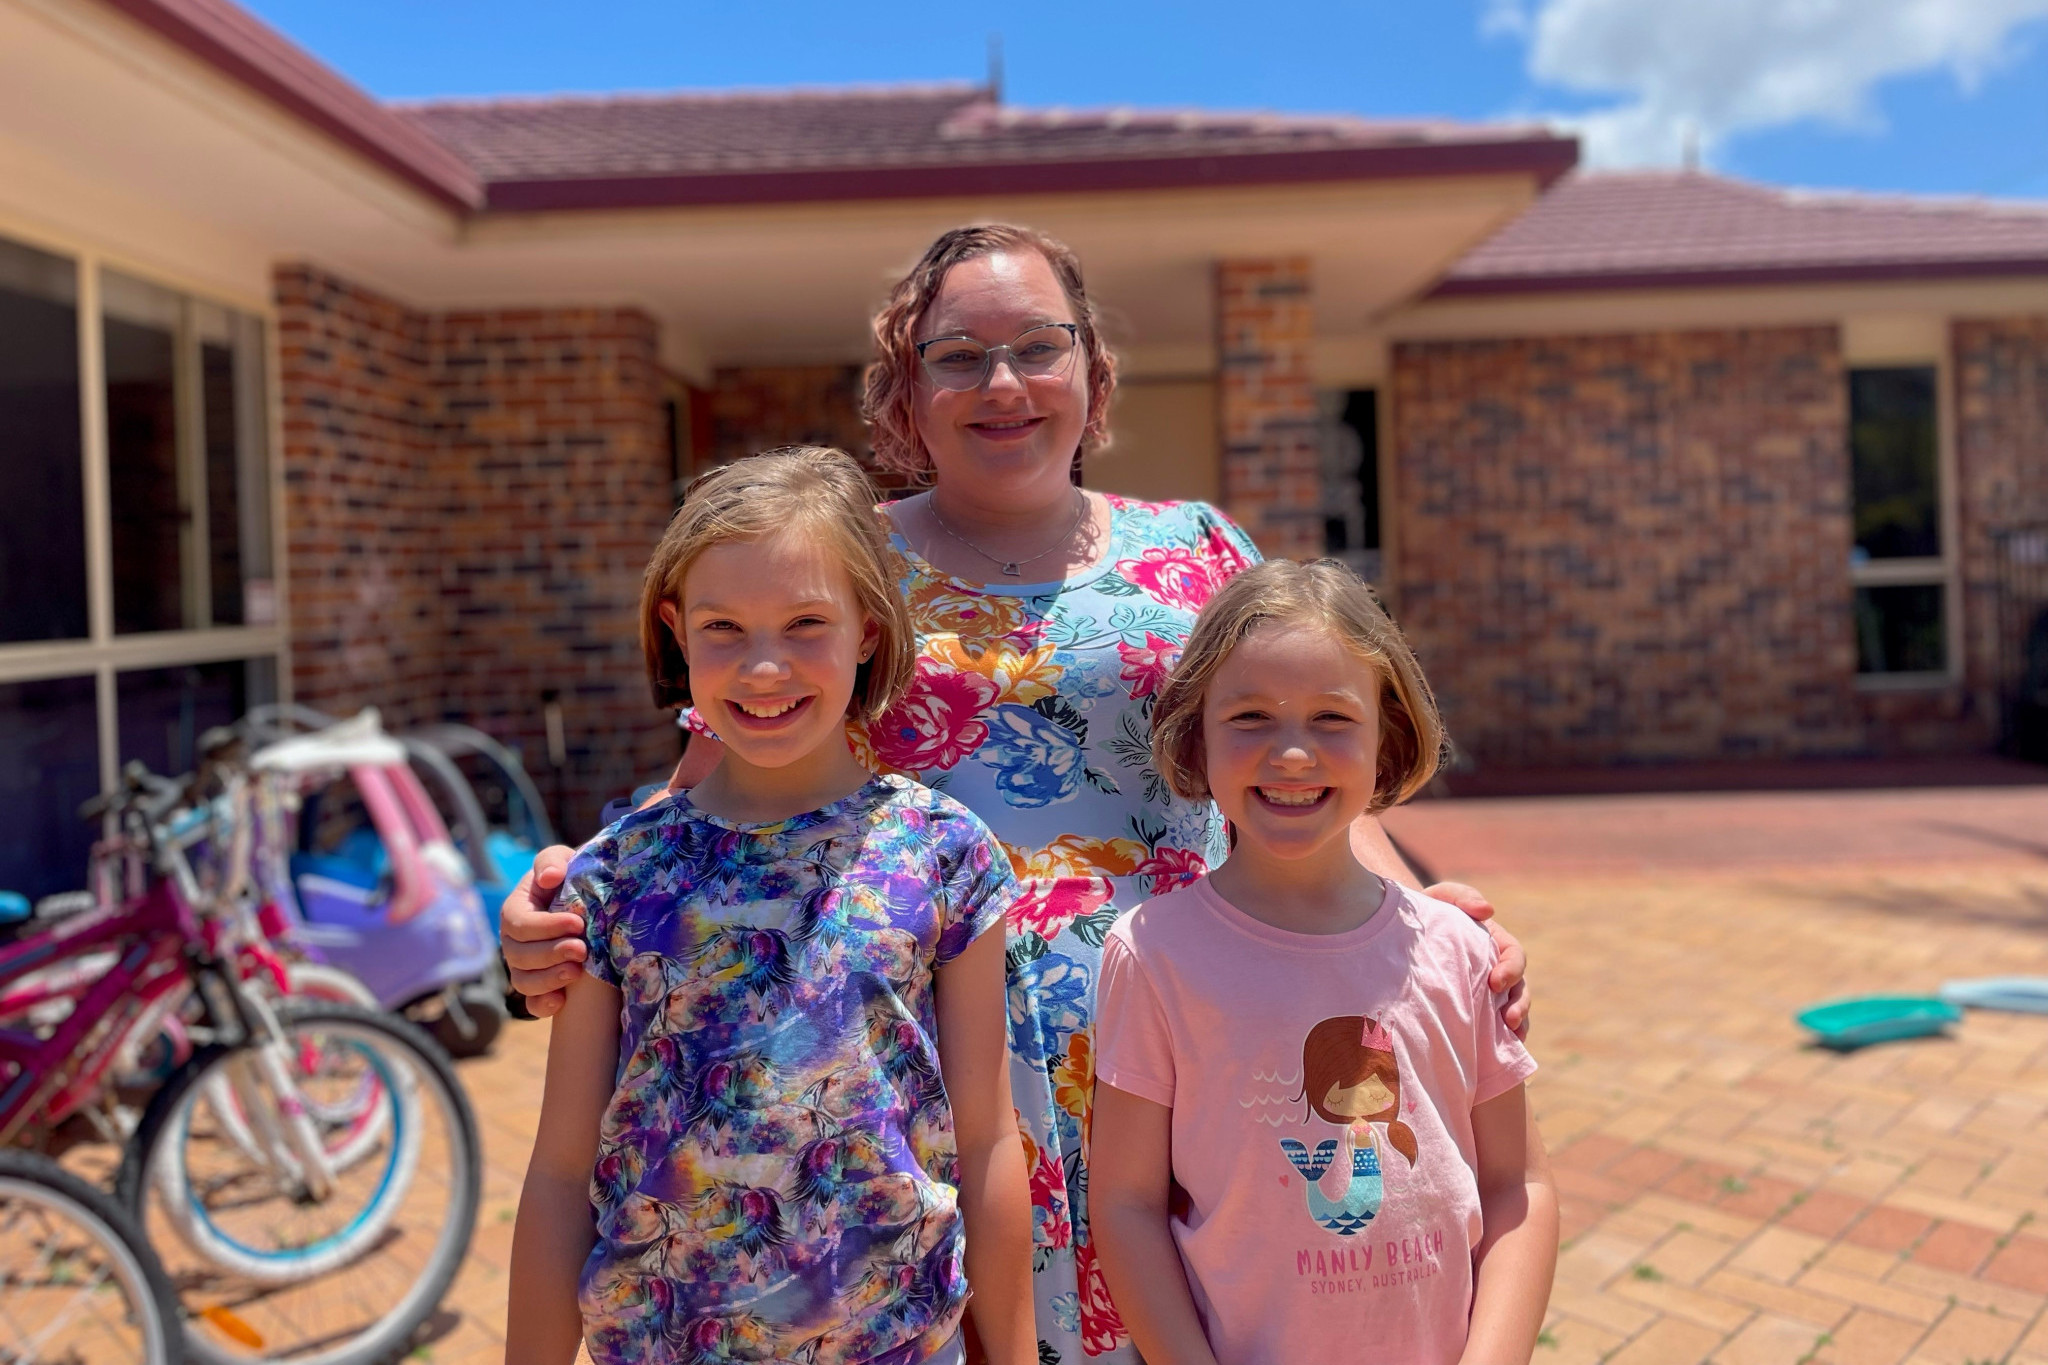 Burpengary sisters prove a cut above when it comes to raising cancer awareness.